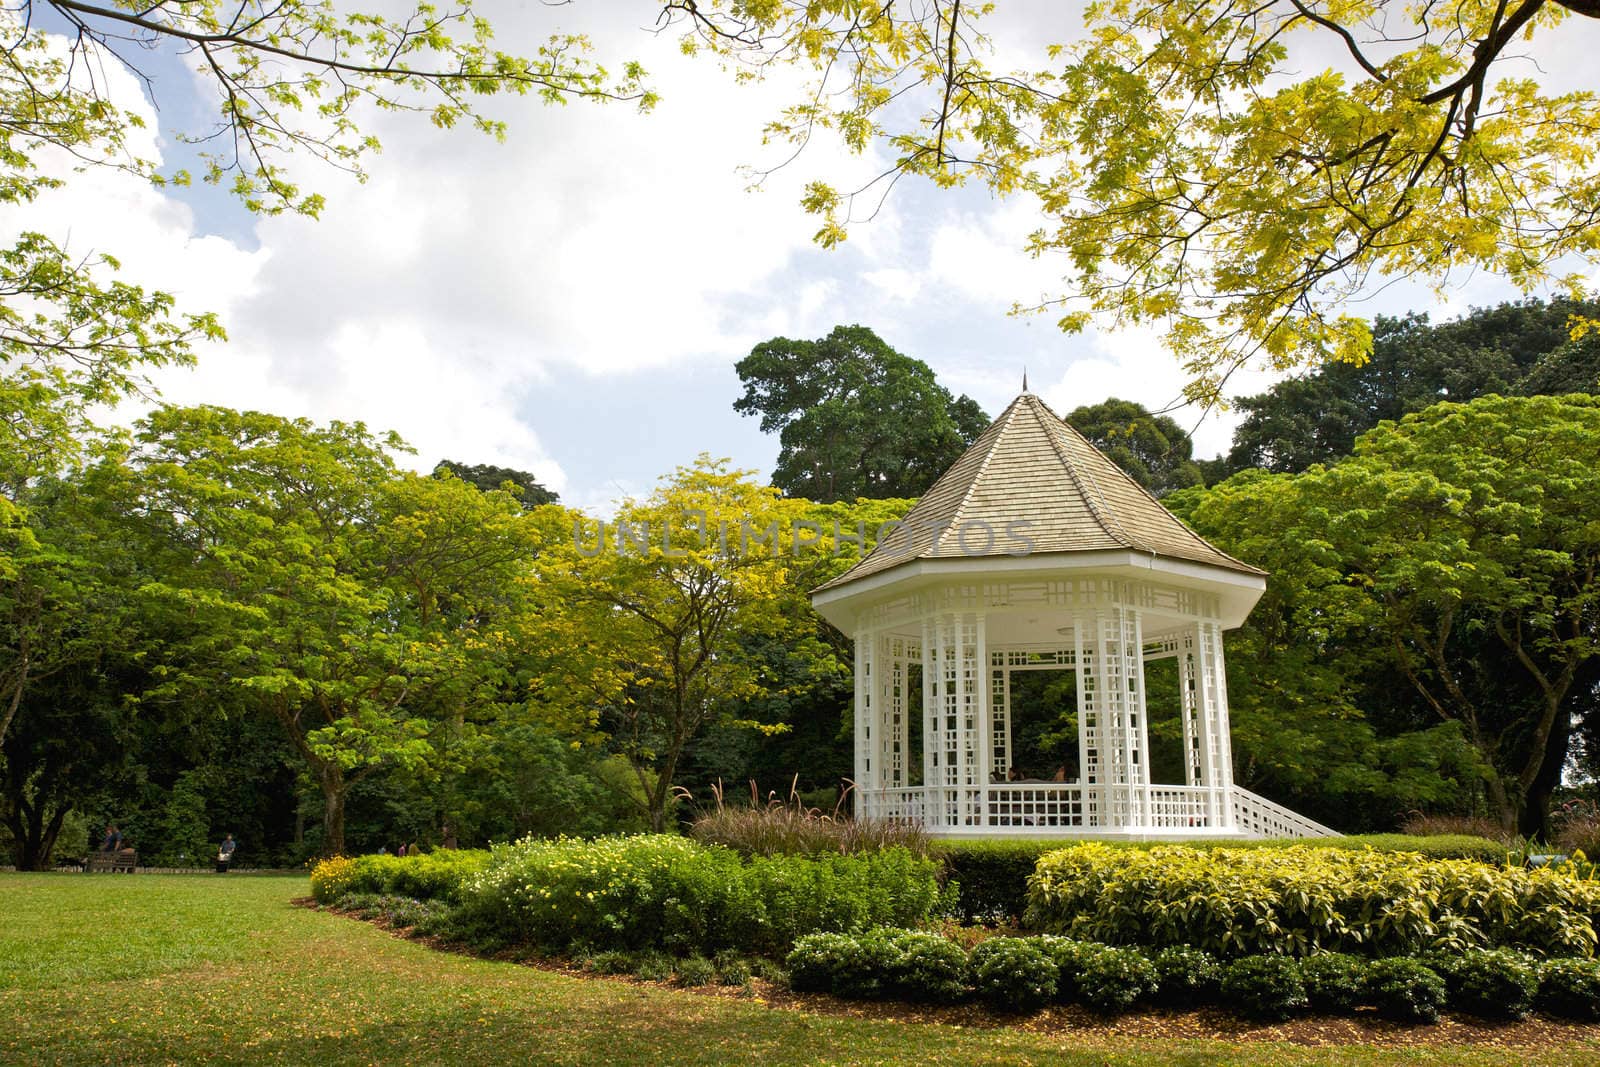 A gazebo known as The Bandstand in Singapore Botanic Gardens. Music performances took place here in the 1930s.